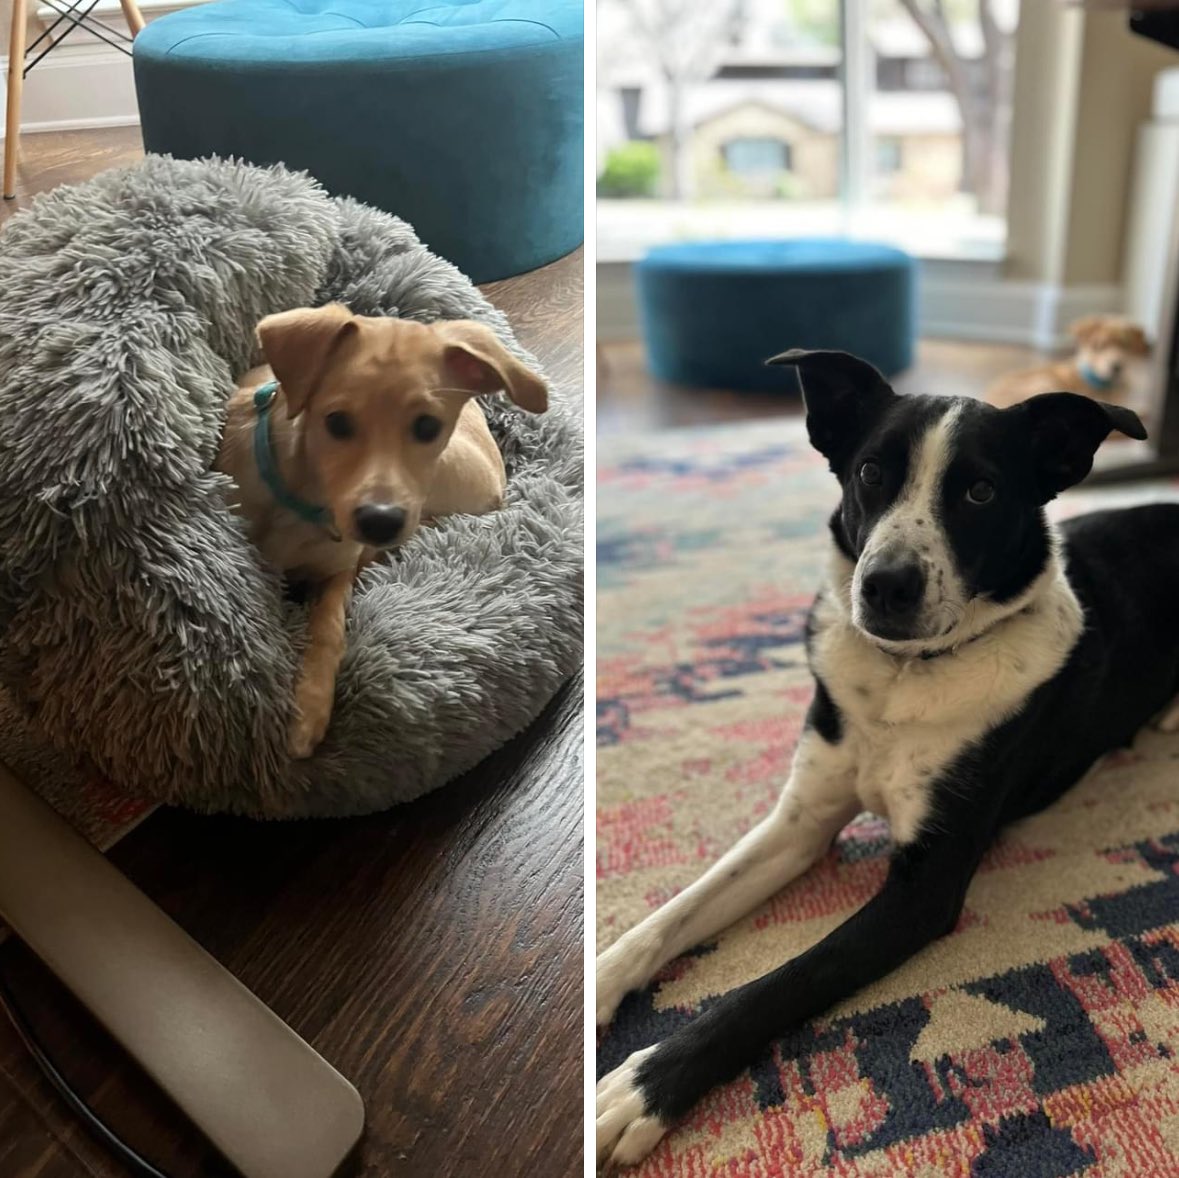 Lost dogs! Coppell area folks: A dear friend is currently in another country and her family’s dogs (Biscuit and Mickey) got out and are loose. PLEASE be on the lookout for them and feel free to contact me/reply if you see them. I’ll pass it along to her.